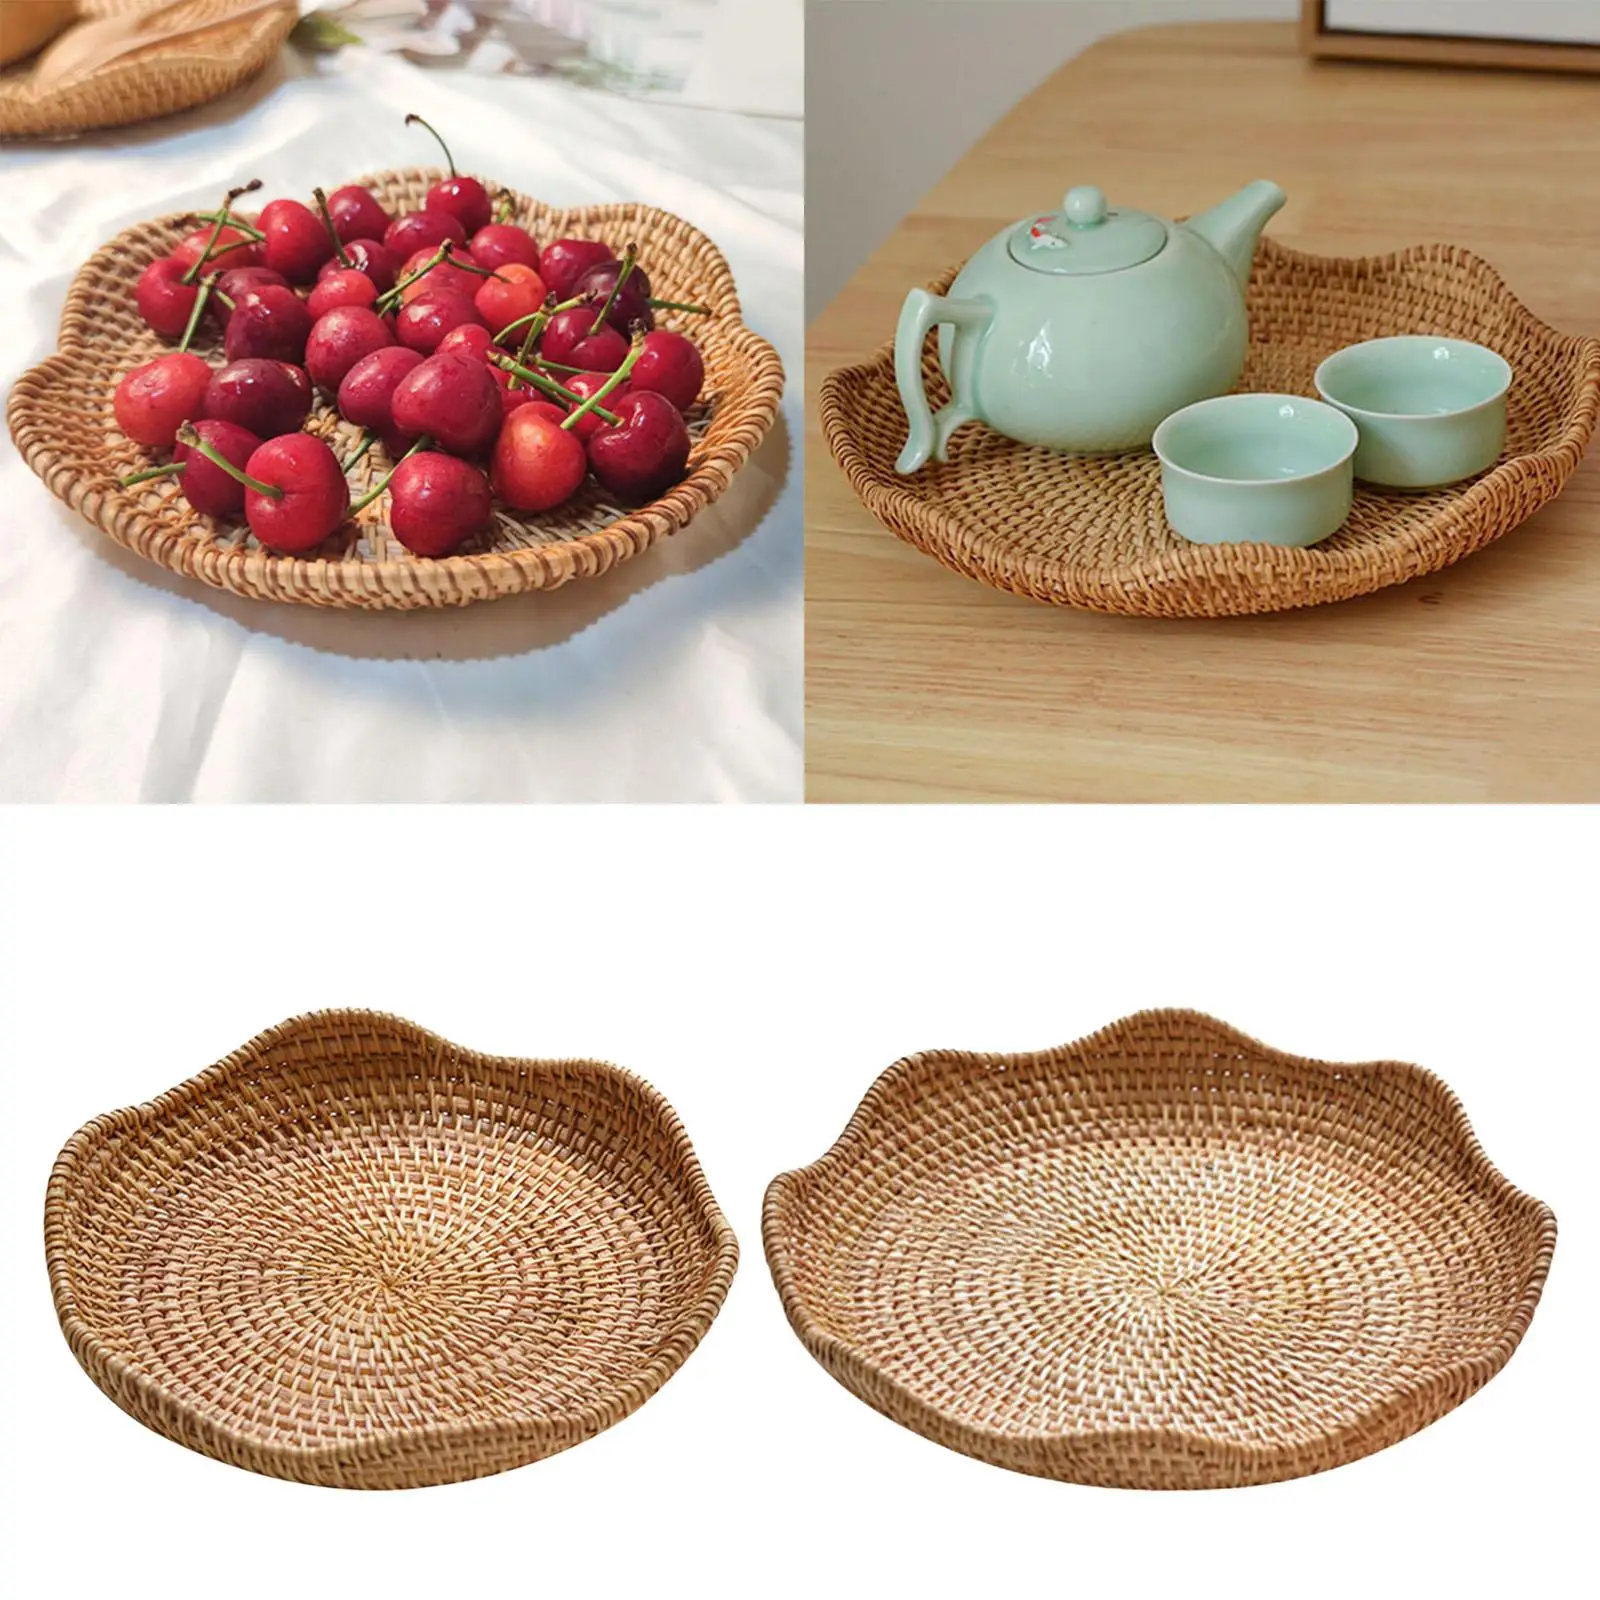 Rattan Round Serving Tray Handwoven Container Display Wicker Tray for Vegetables Snack Bread Living Room Decoration Bathroom